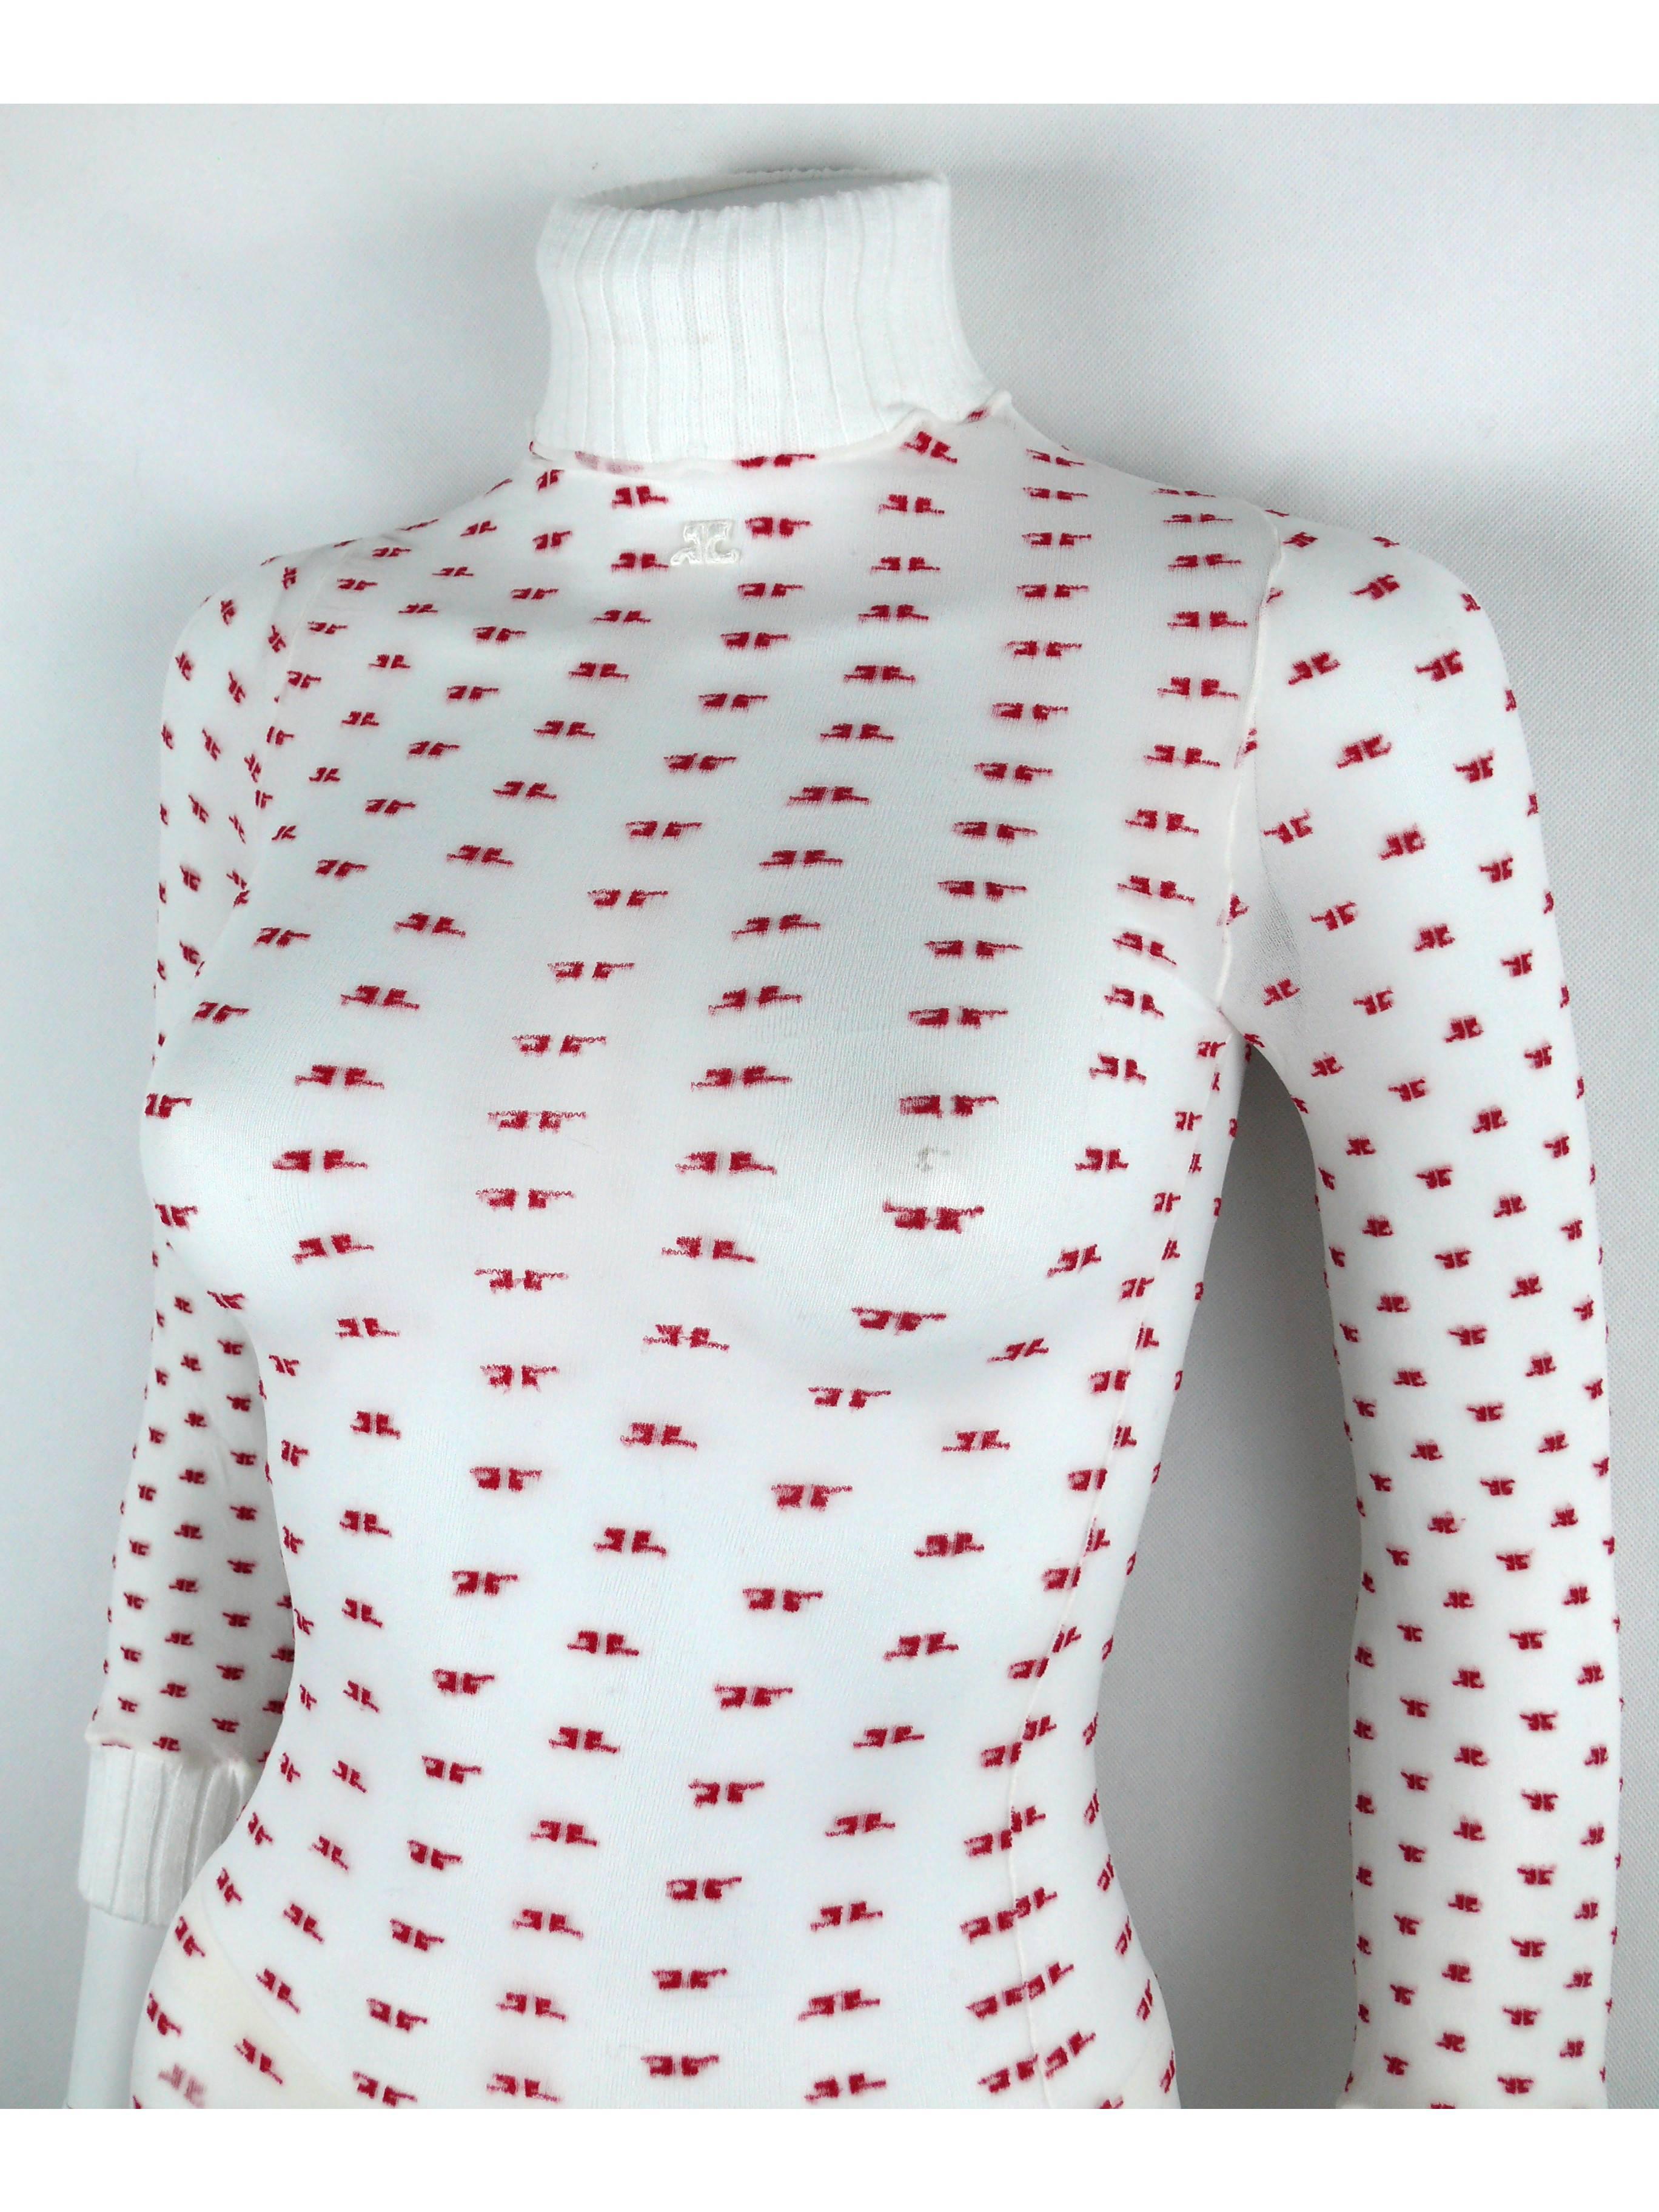 COURREGES vintage rare white sheer and red monogram set.

The set includes a turtle neck half sleeve top and matching tights.
Embroidered COURREGES logo at the front top.

Unused condition with original packaging (used).

Label reads